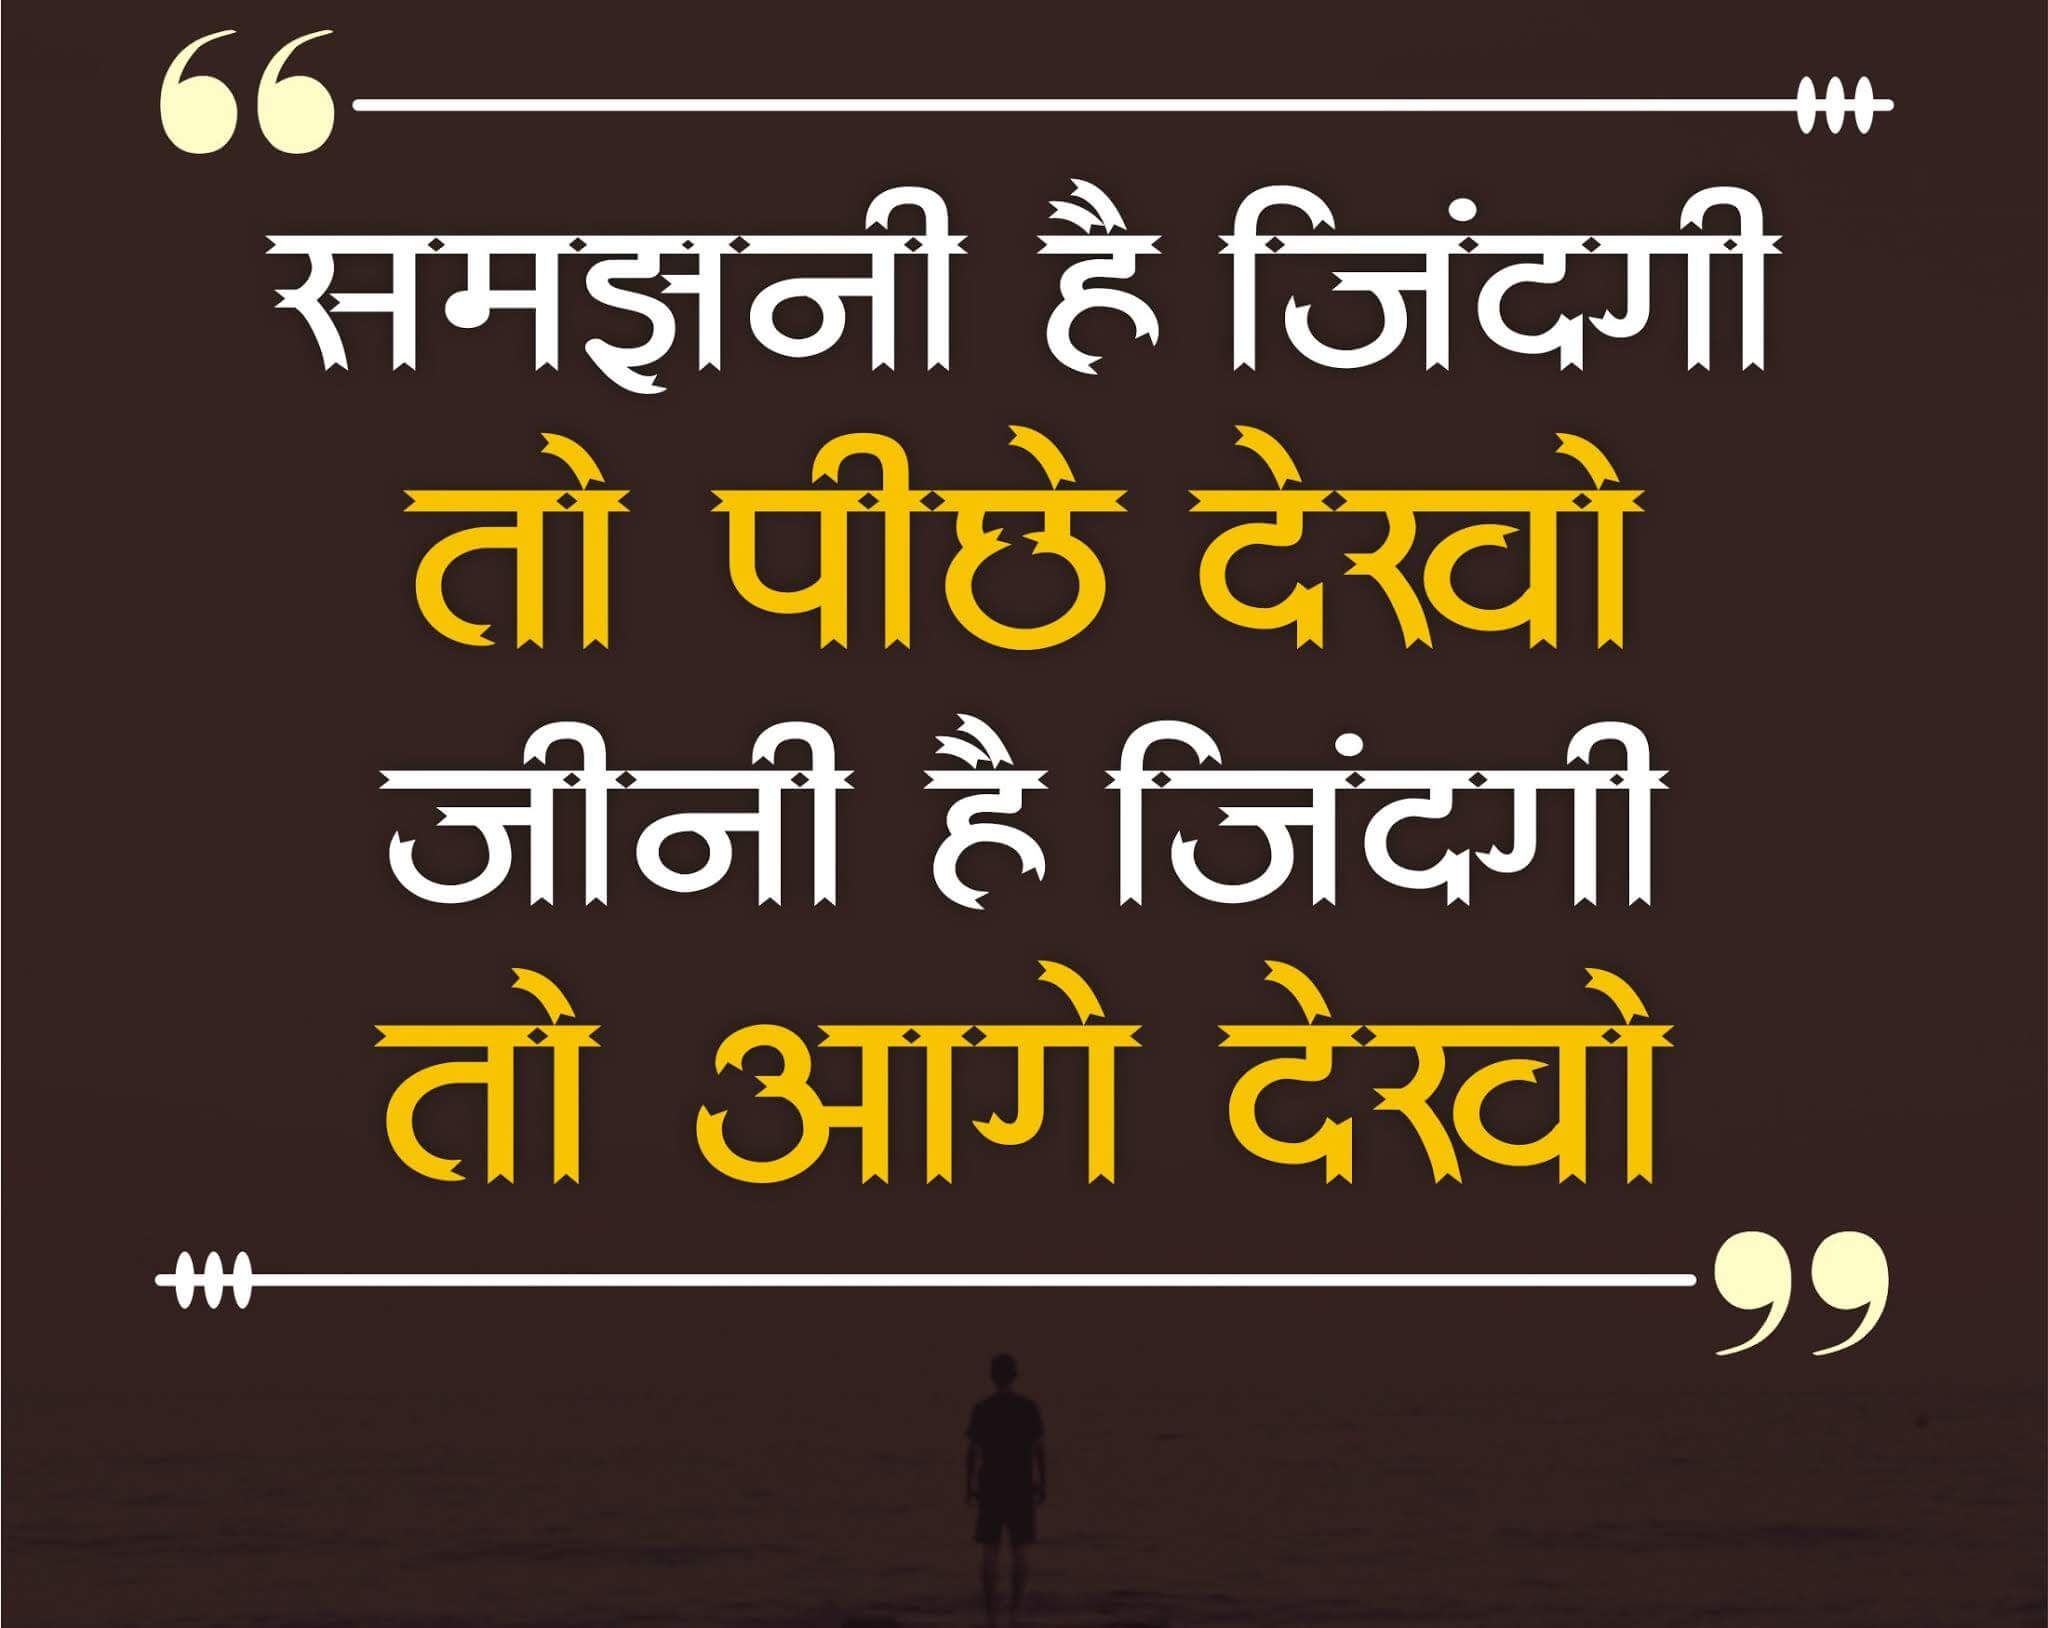 Motivational Quotes in Hindi 